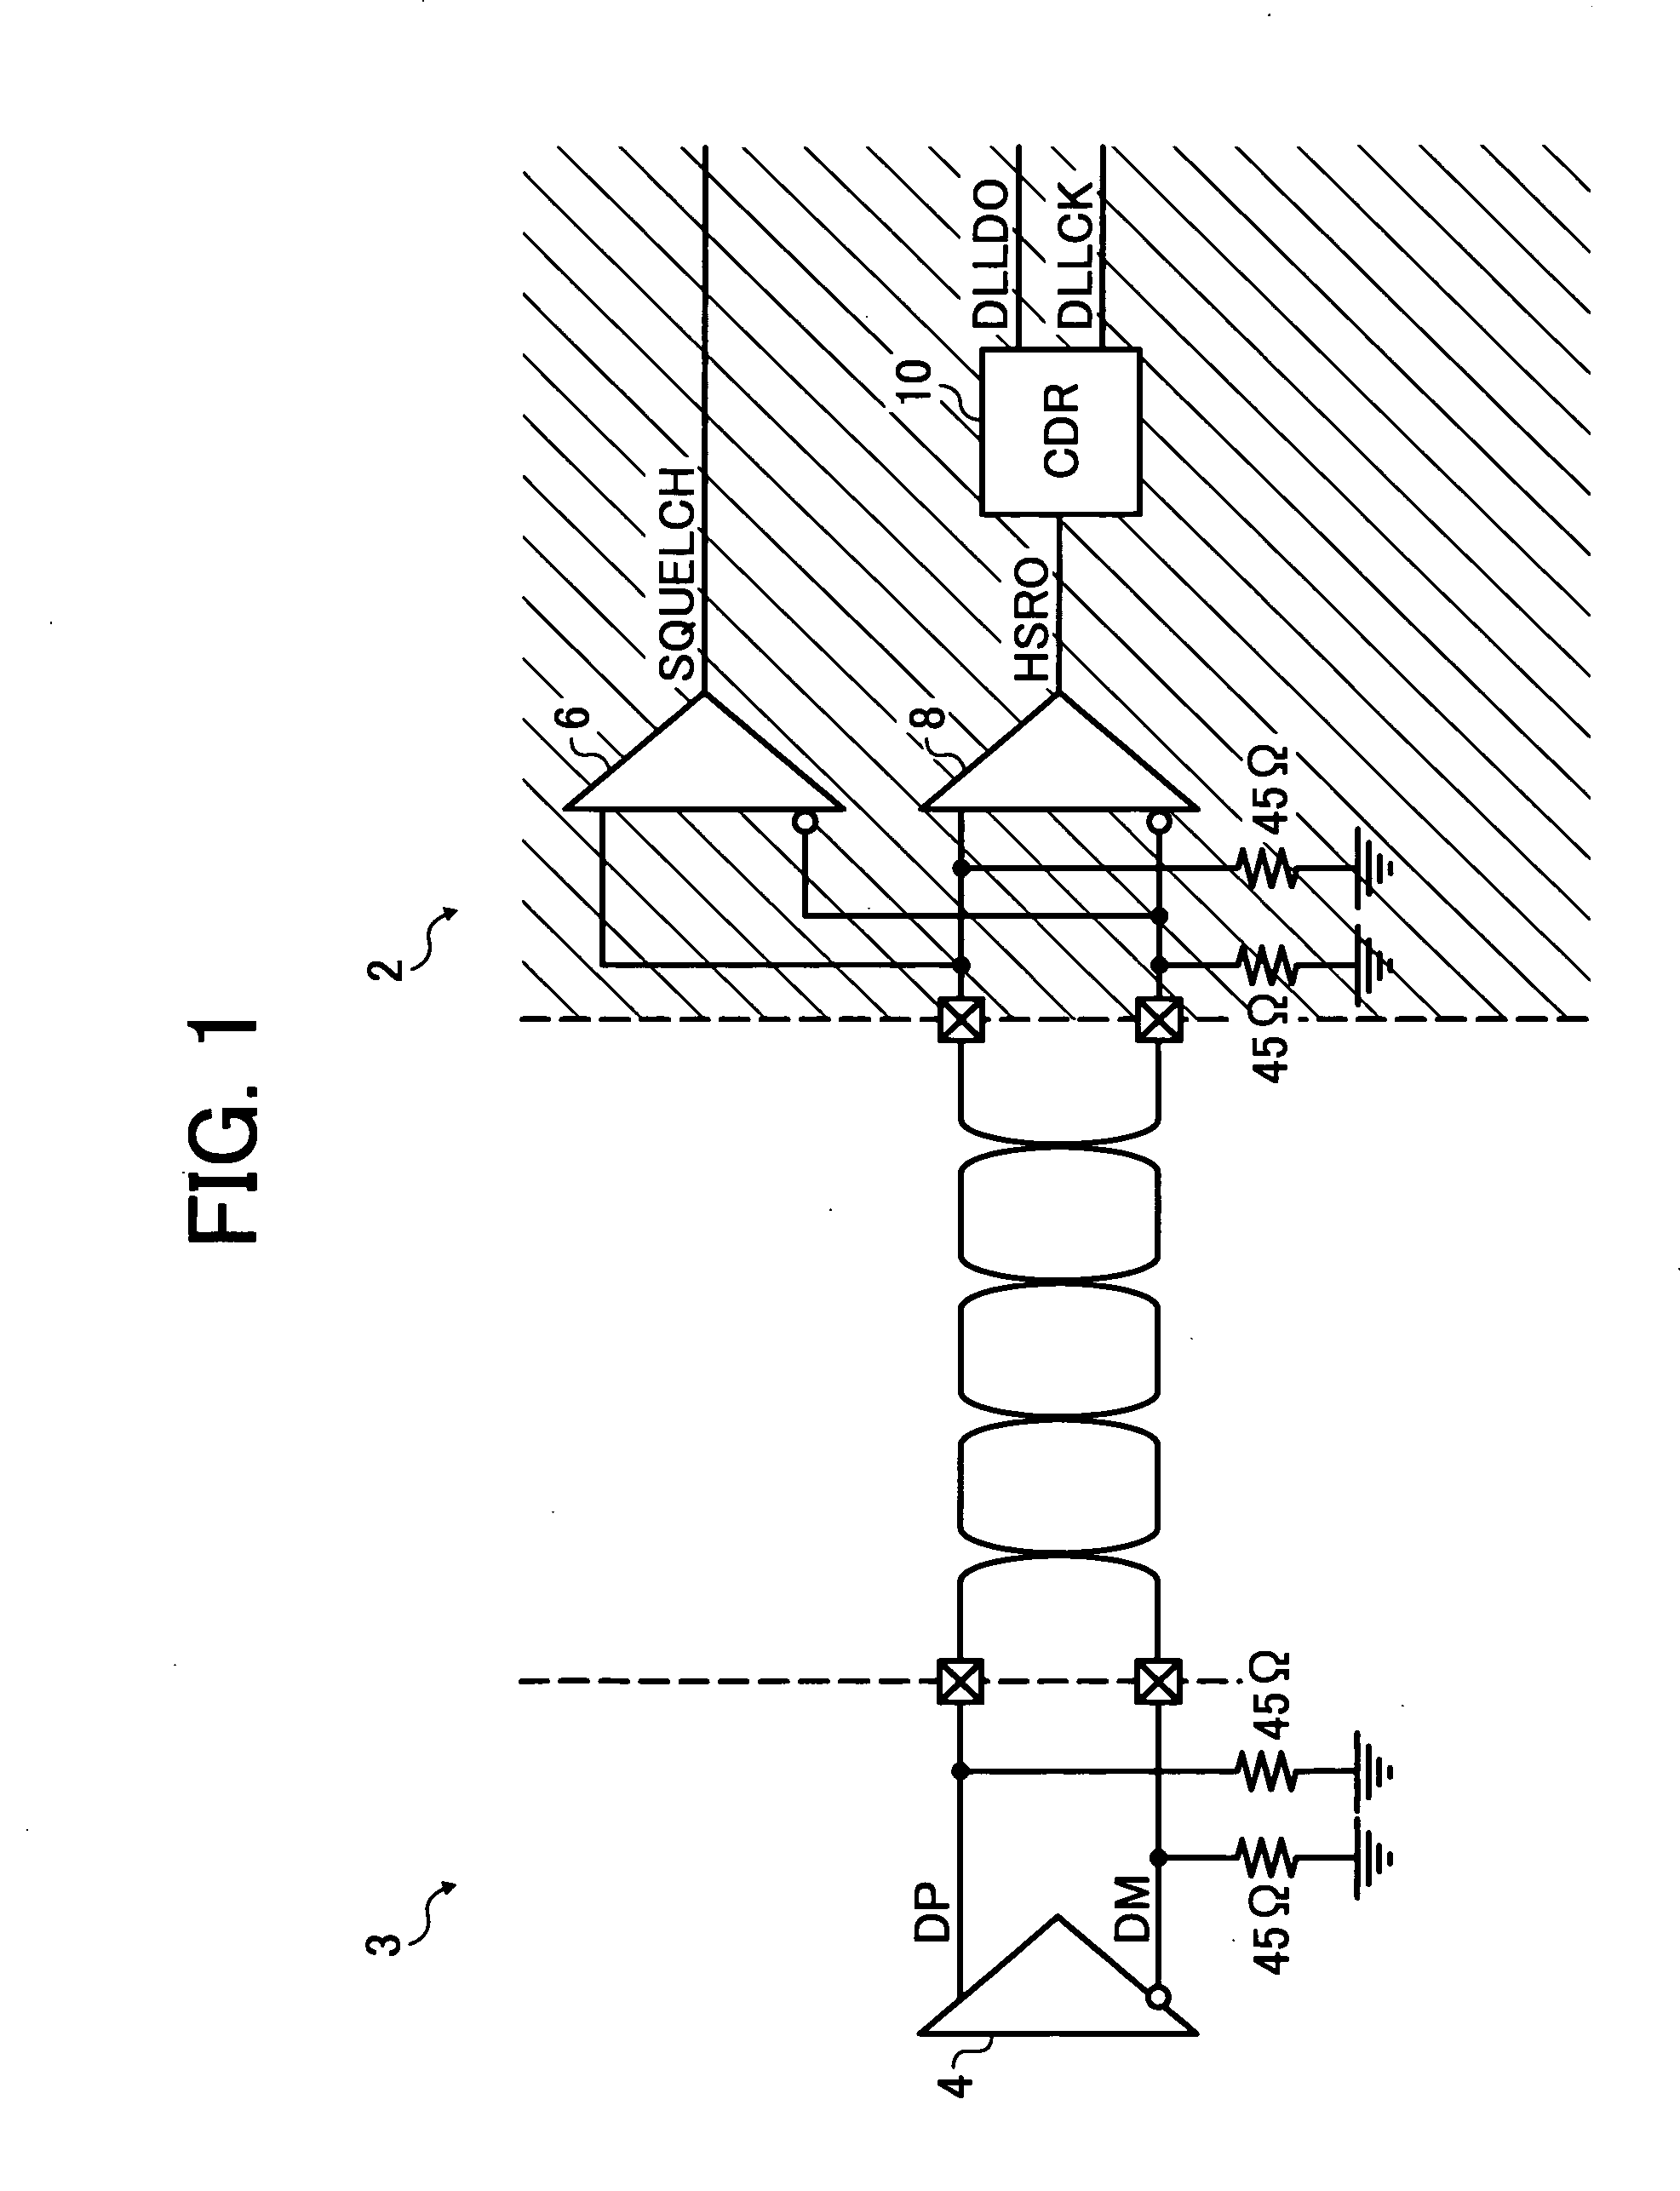 Circuit and method for differential signaling receiver